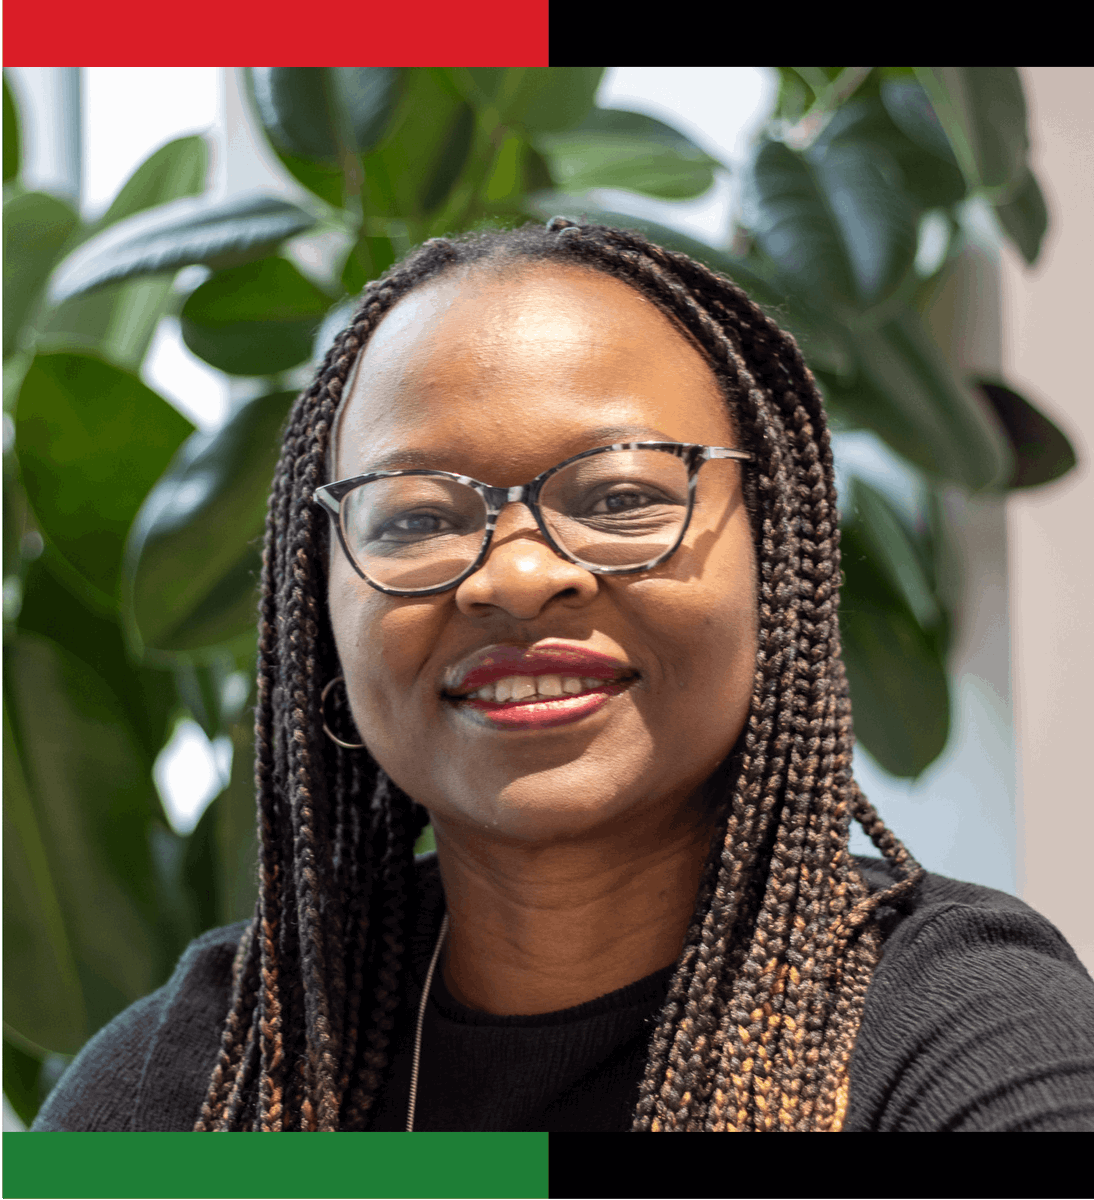 Meet Chika, Associate Partner, IBM UK Public Sector “ #BlackHistoryMonth is a time to reflect on how far we’ve come, celebrate successes and achievements across industries and geographies, and focus on driving progress for future generations.' #SalutingOurSisters #ProudIBMer